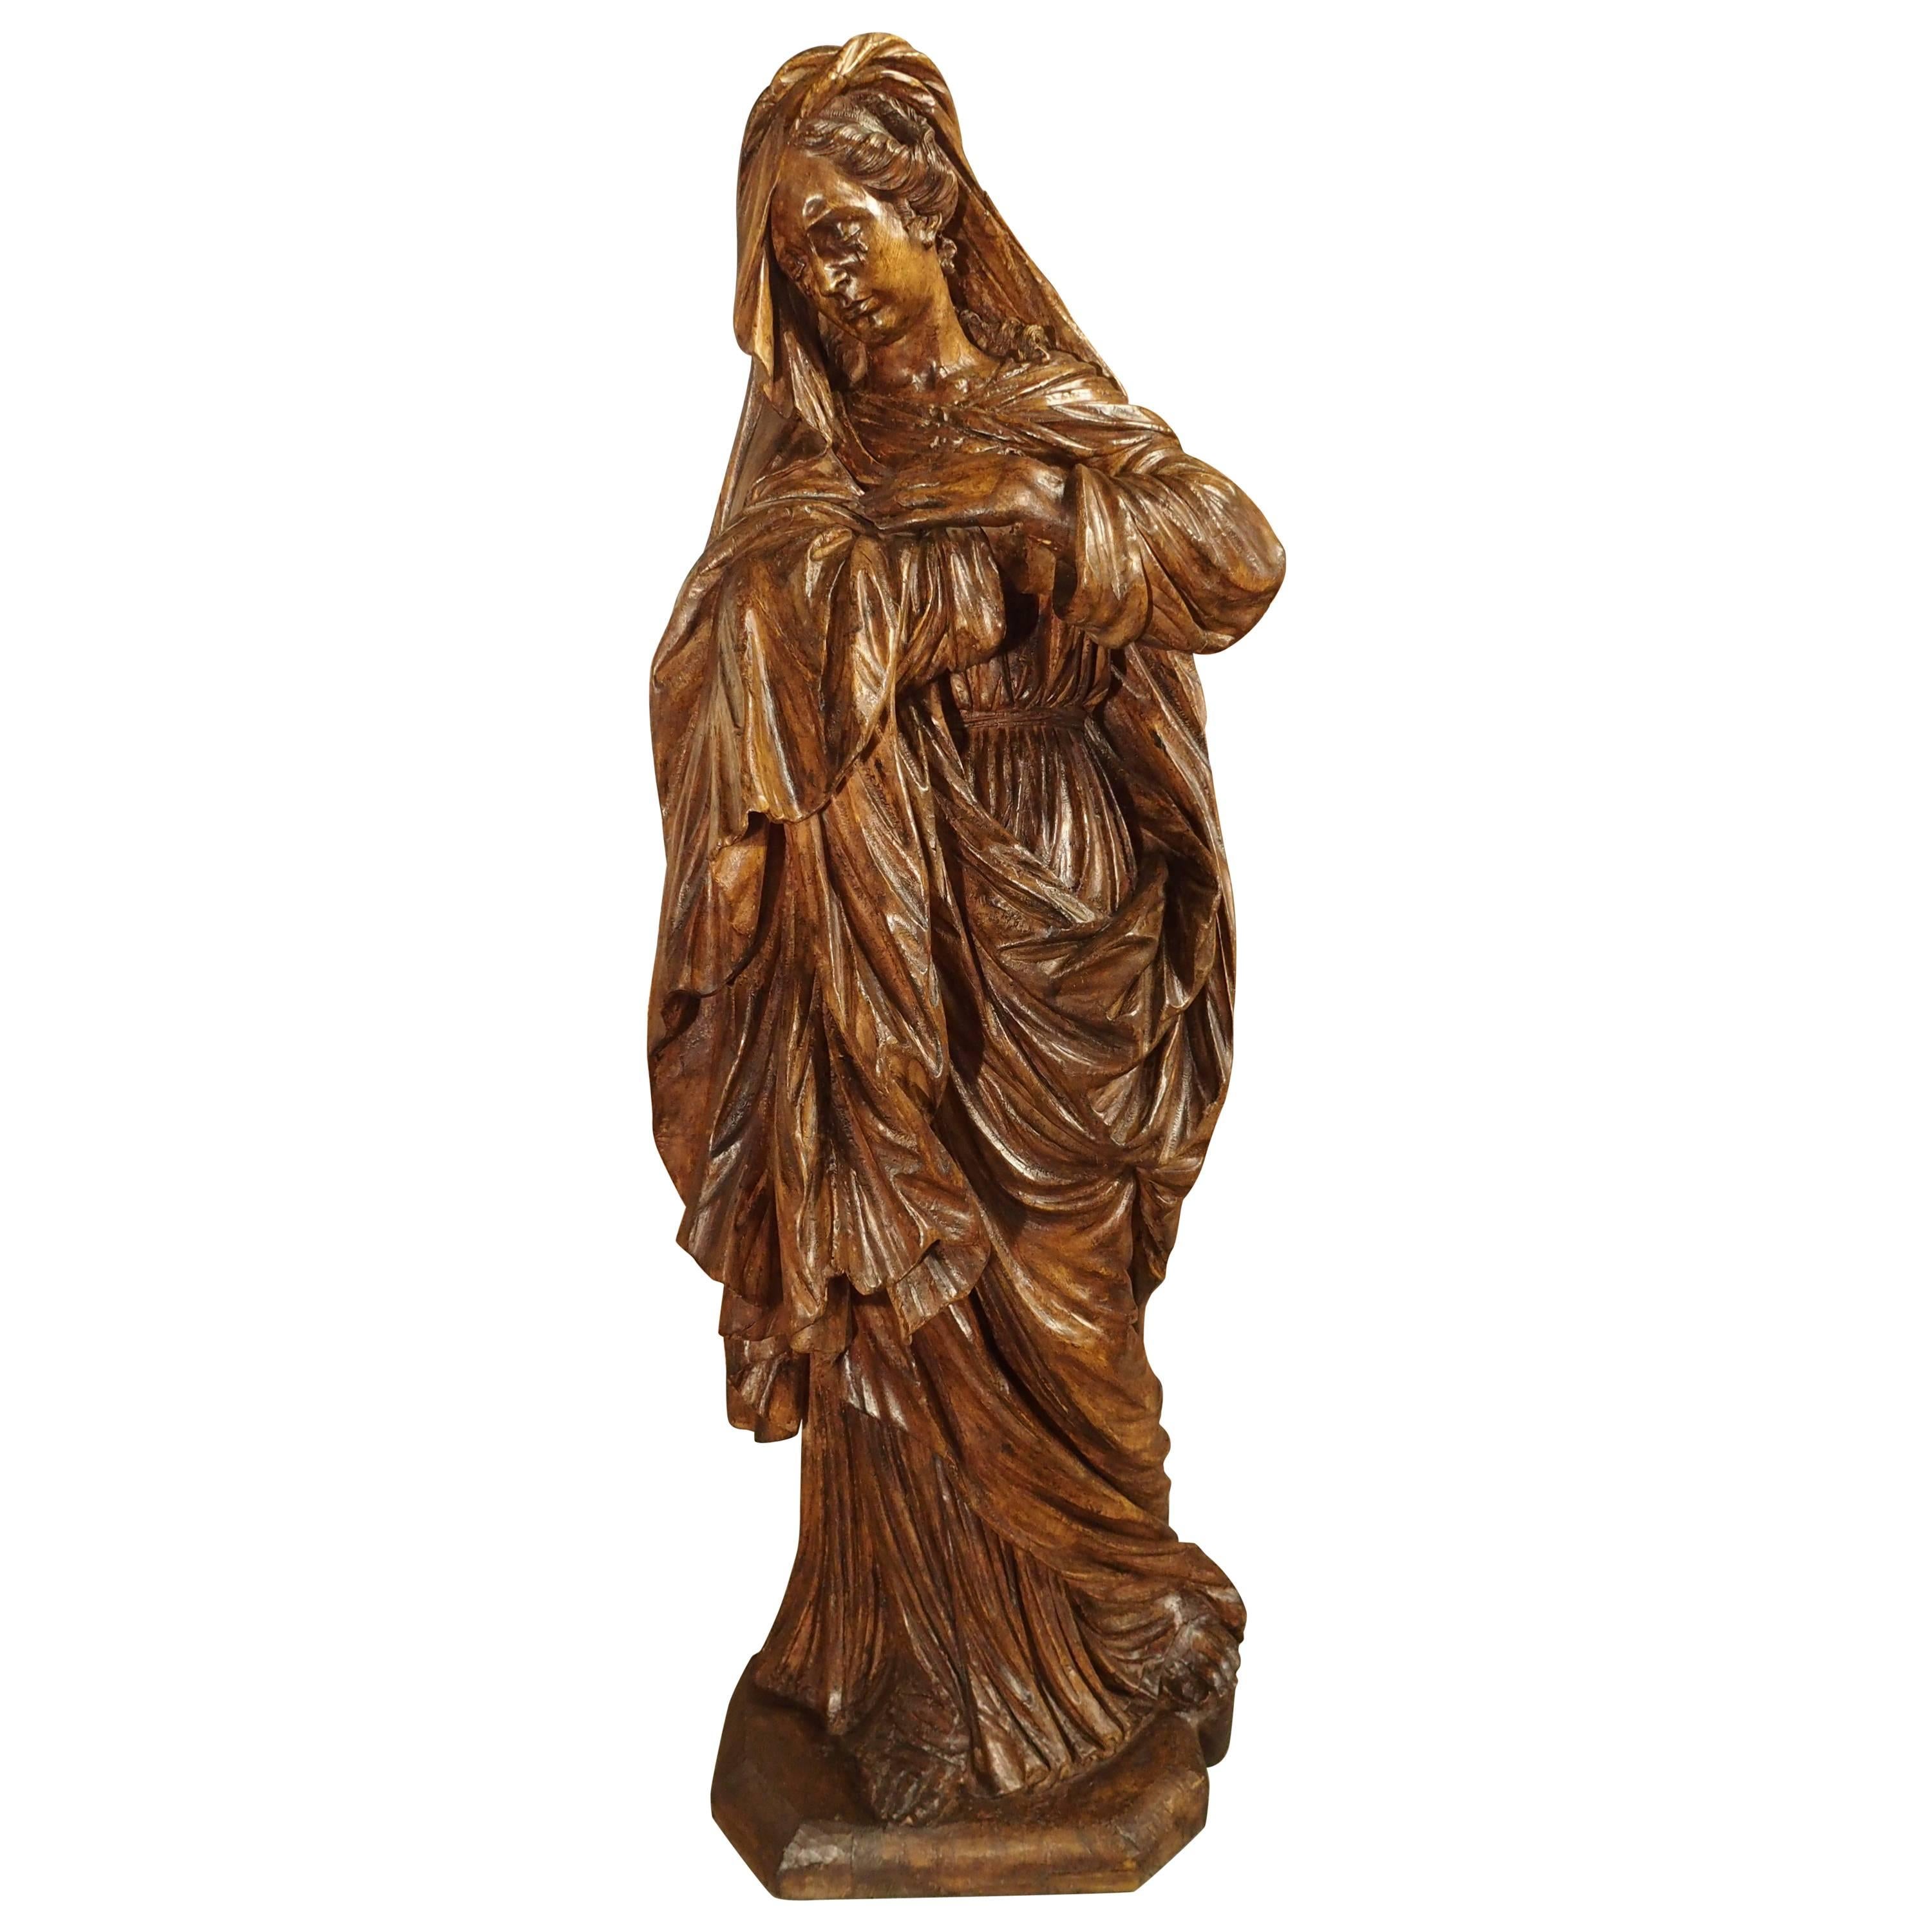 17th Century Carved Wooden Statue from France